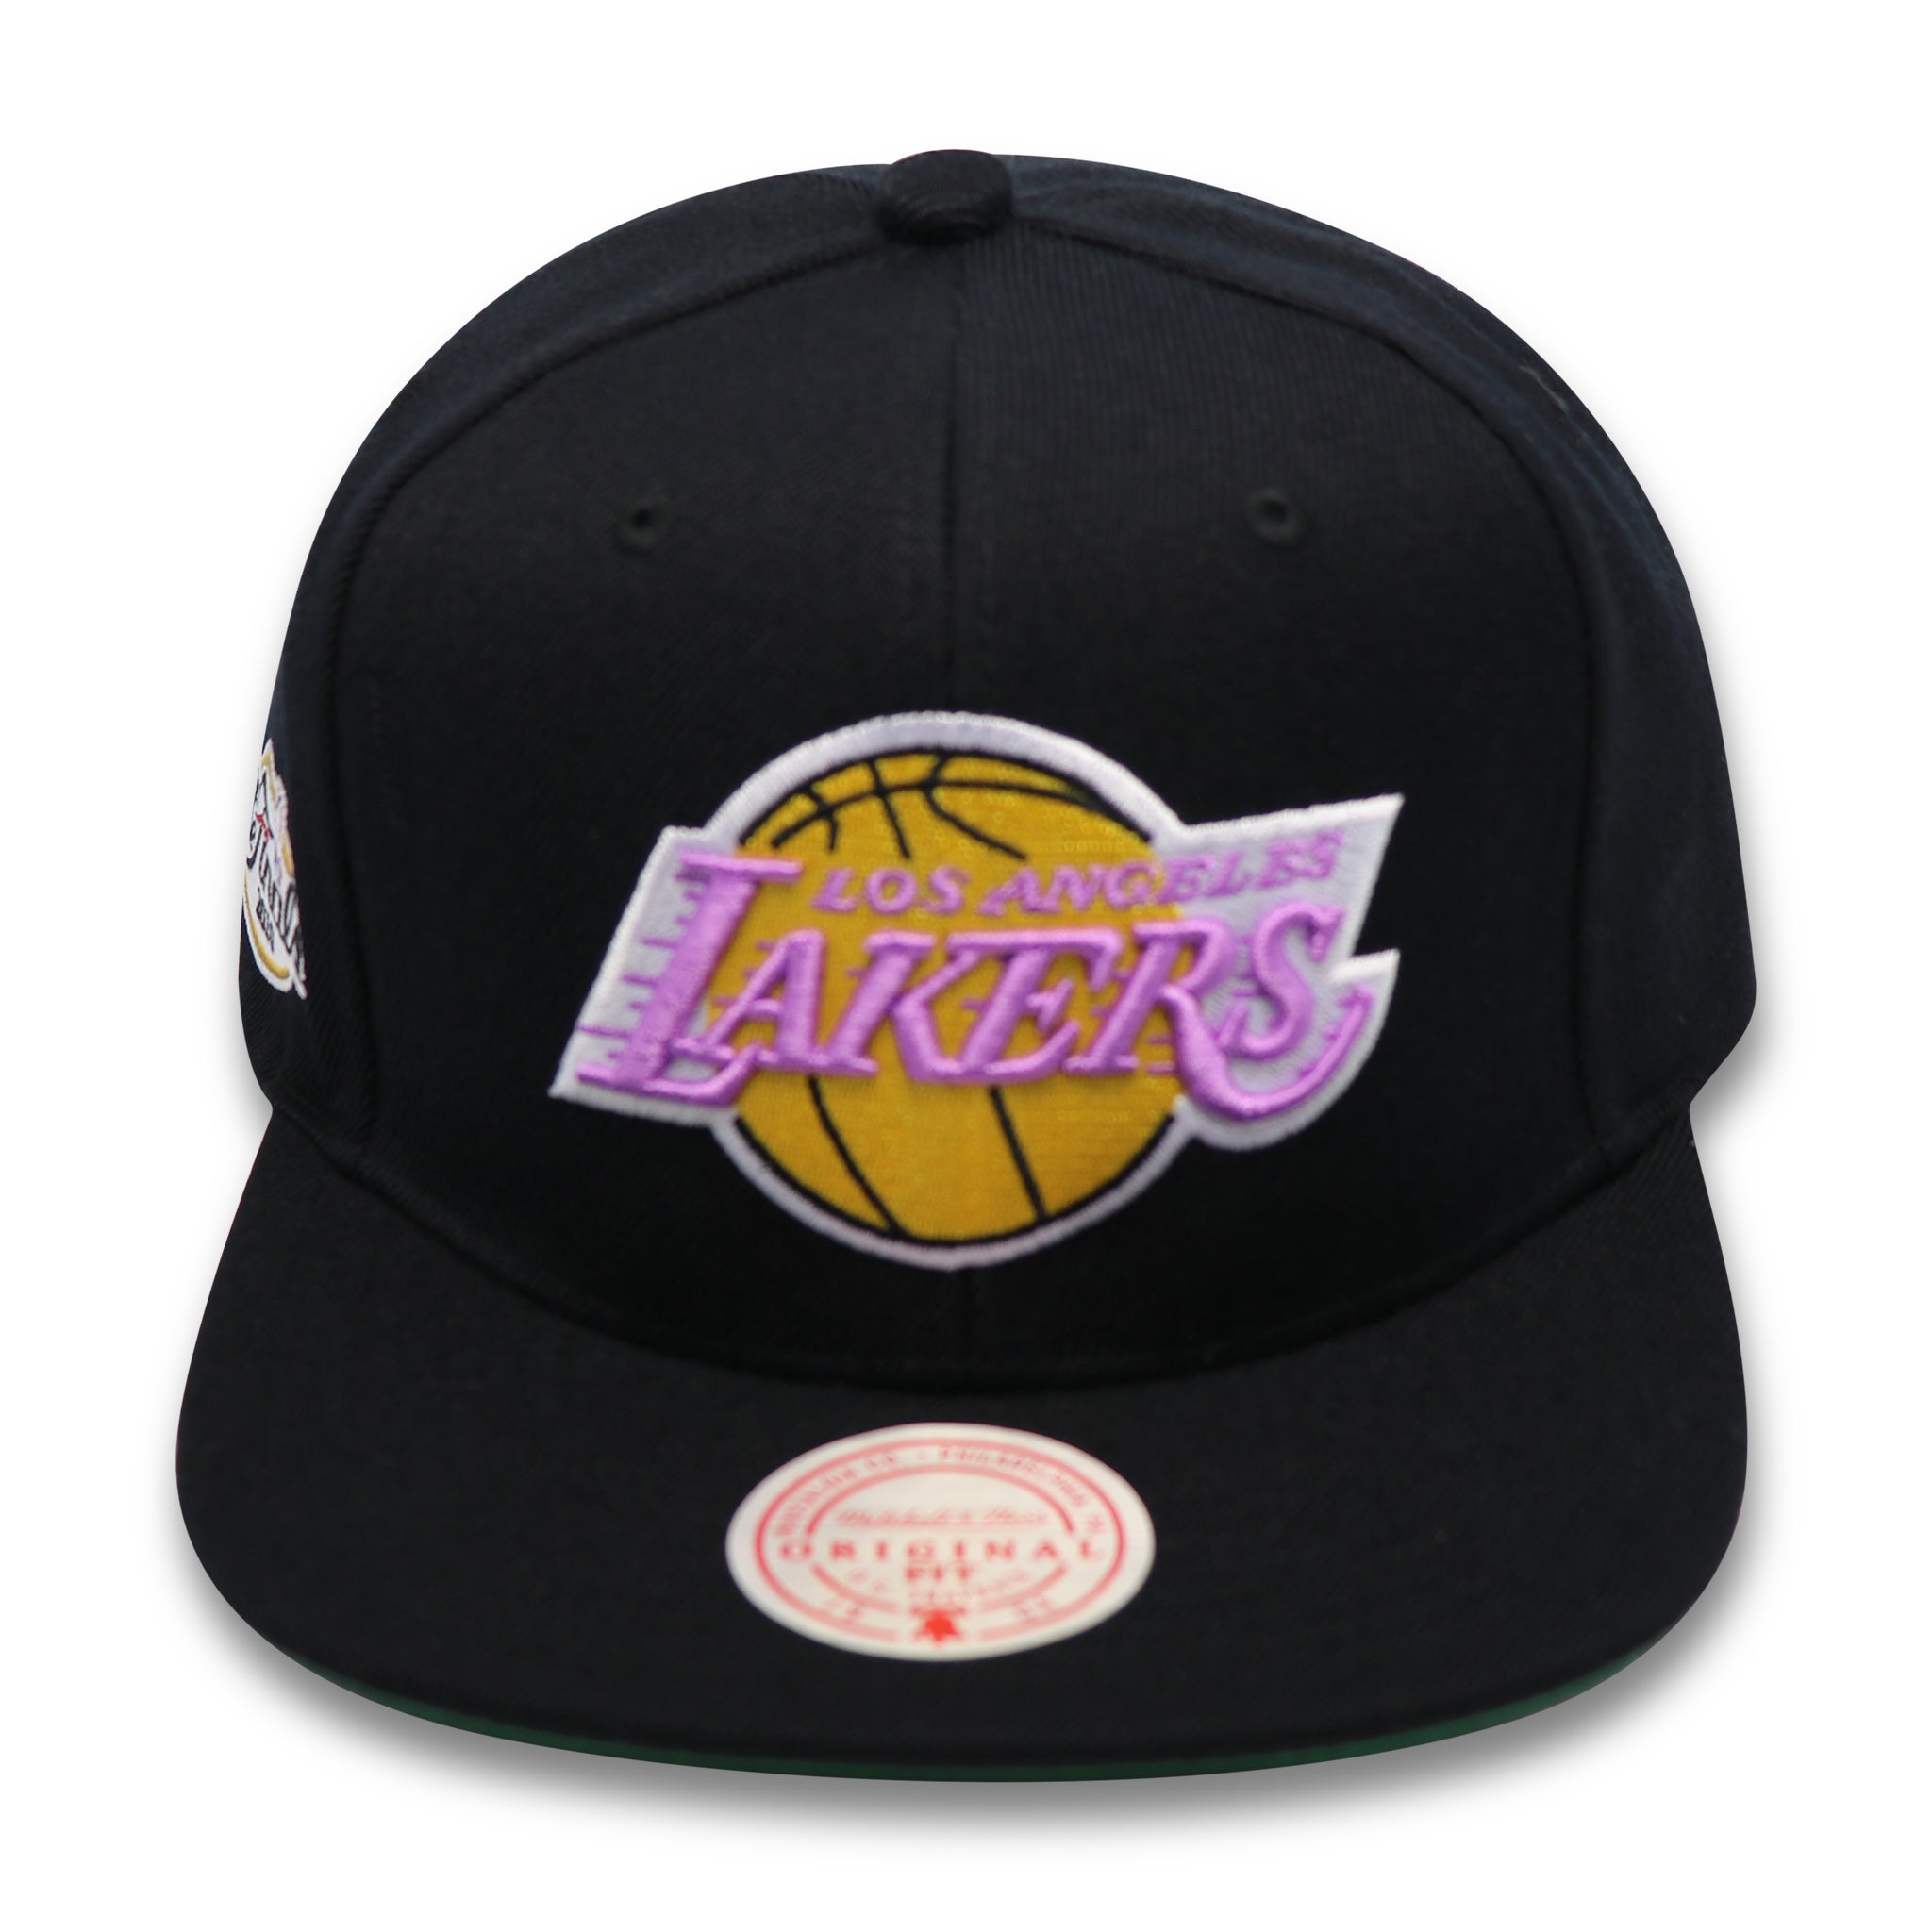 LOS ANGELES LAKERS (2010 FINALS) MITCHELL & NESS SNAPBACK